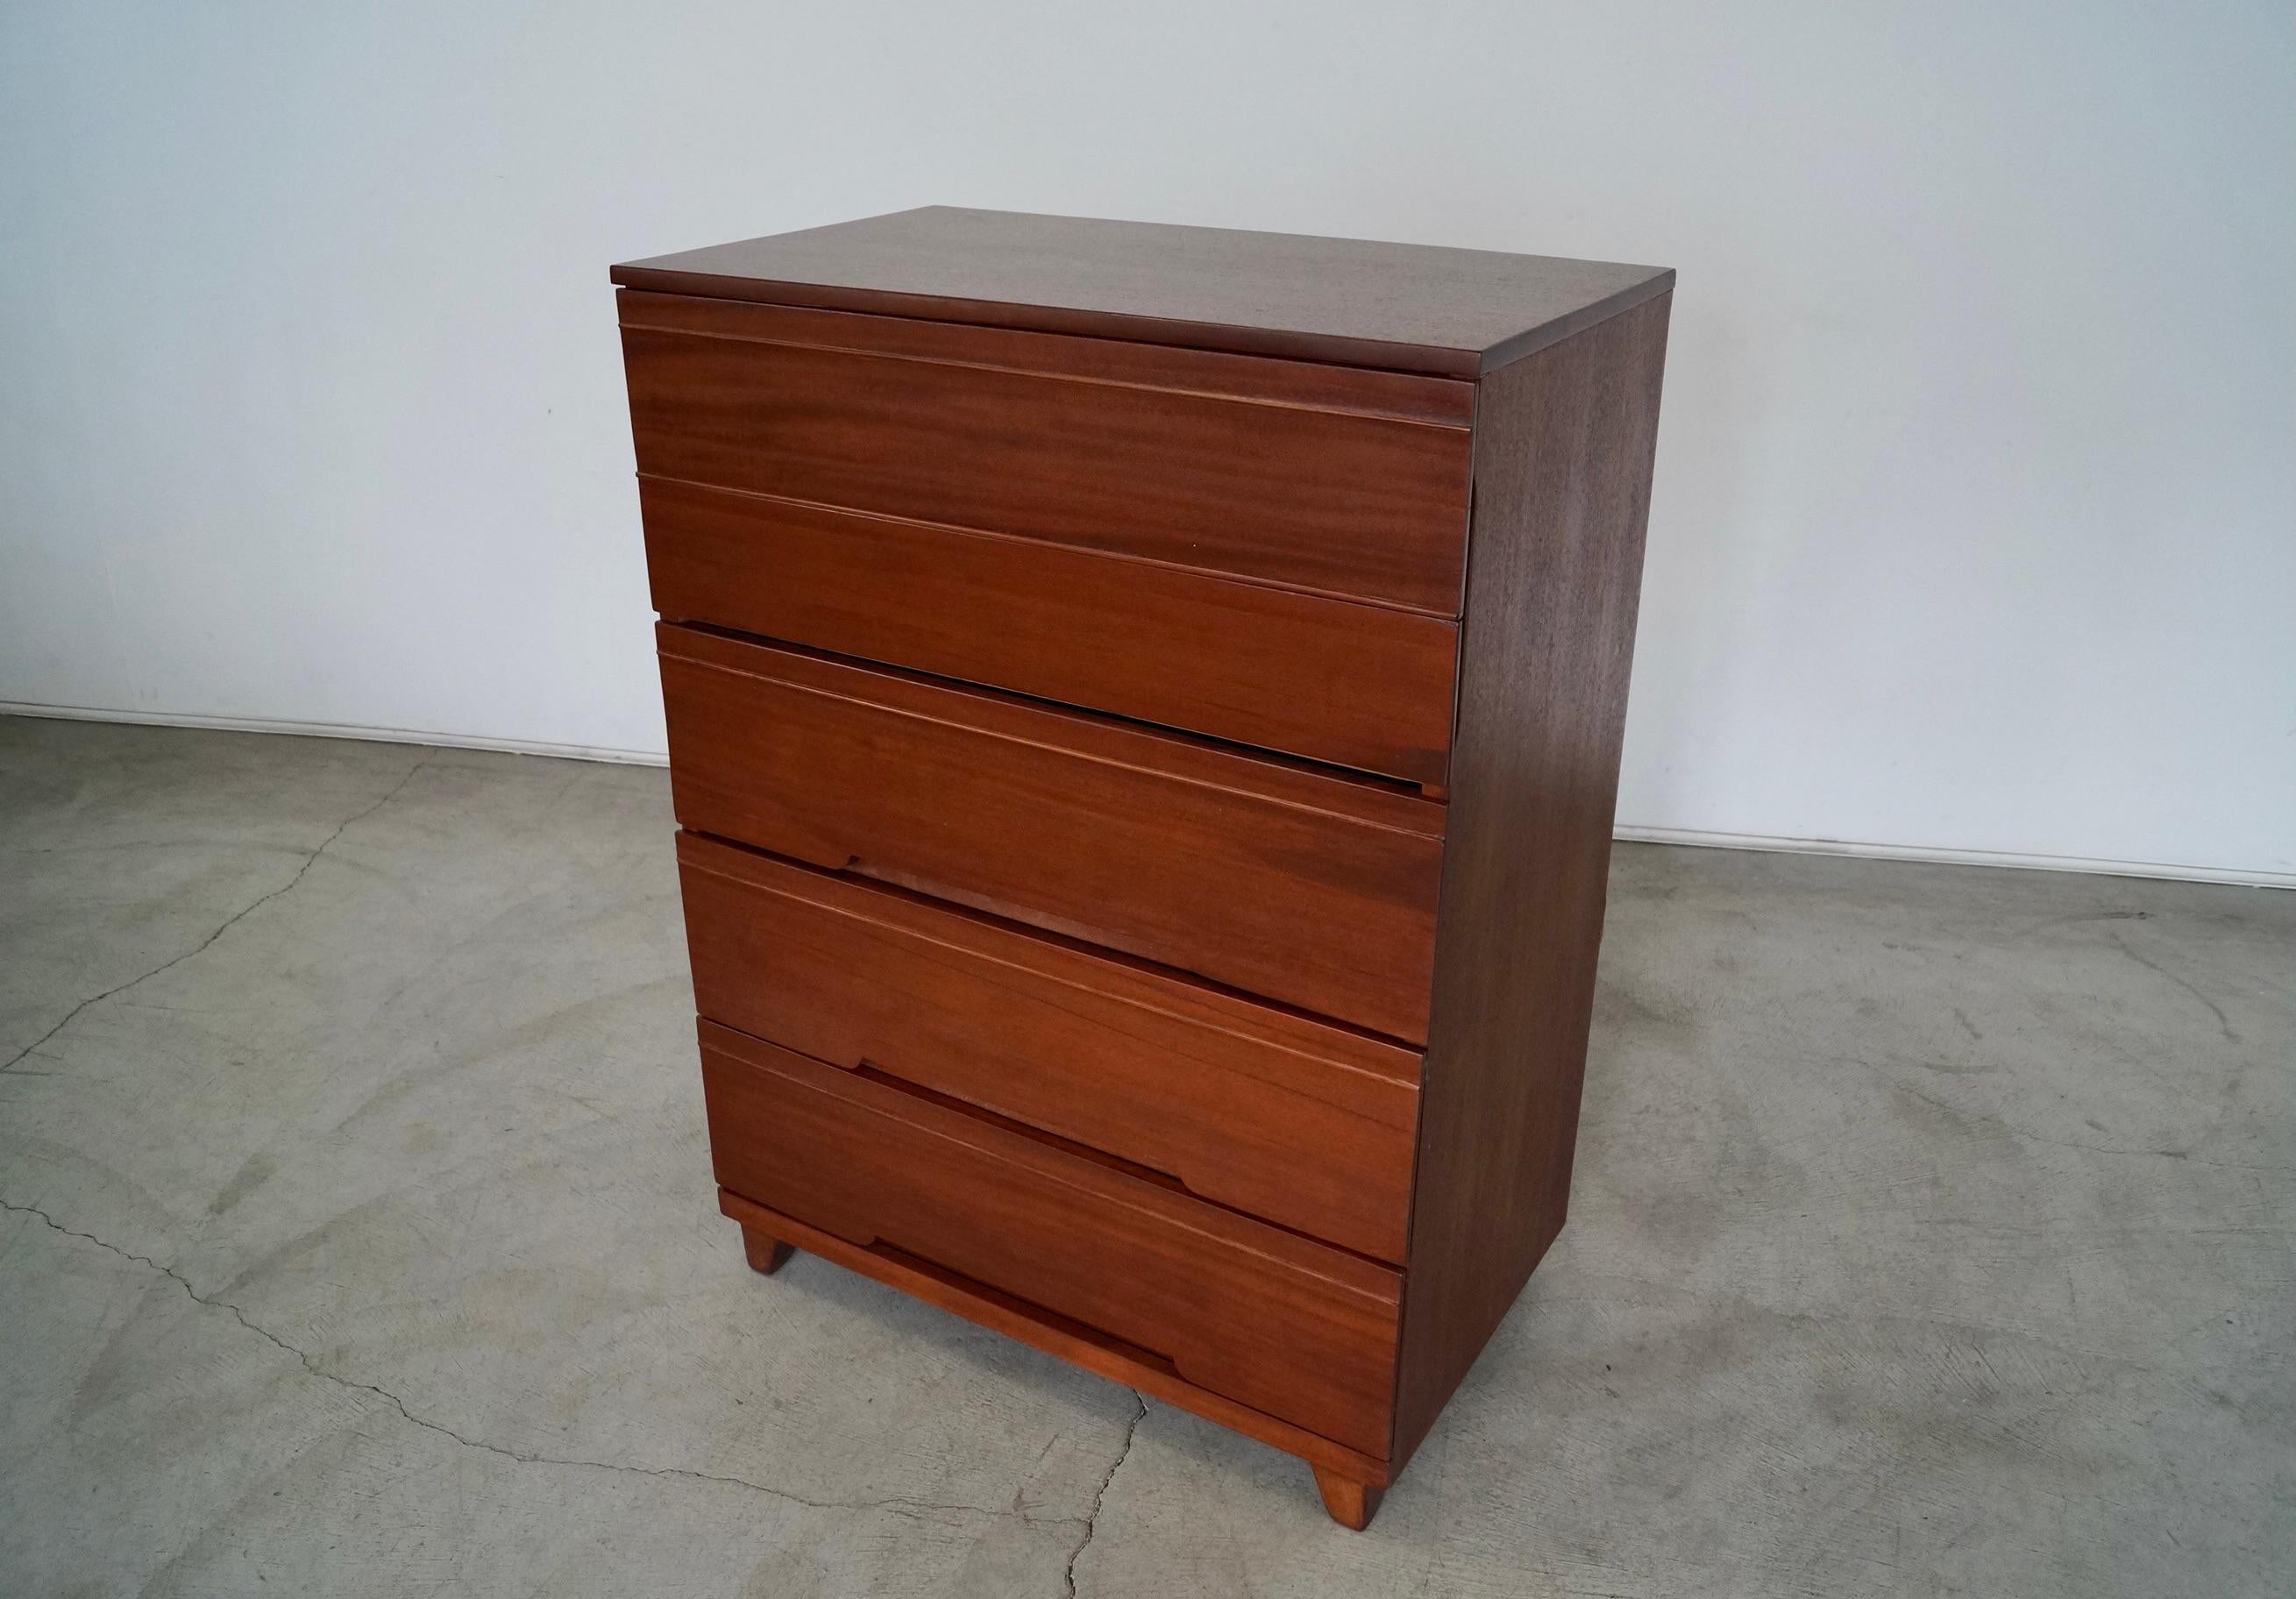 1940's Art Deco Highboy Dresser In Good Condition For Sale In Burbank, CA